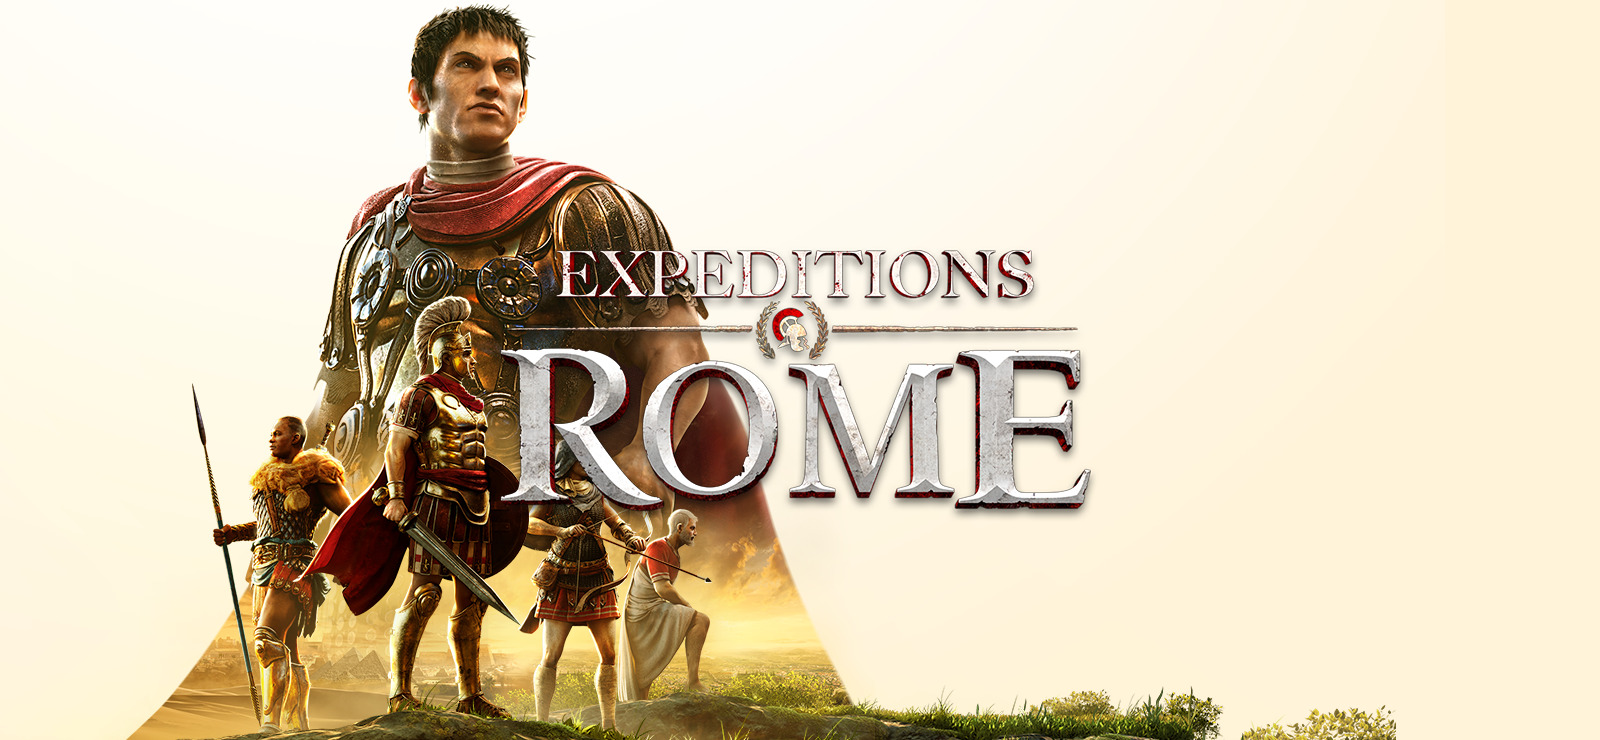 Download Expeditions: Rome v1.4.0.84.62236 – FitGirl Repack